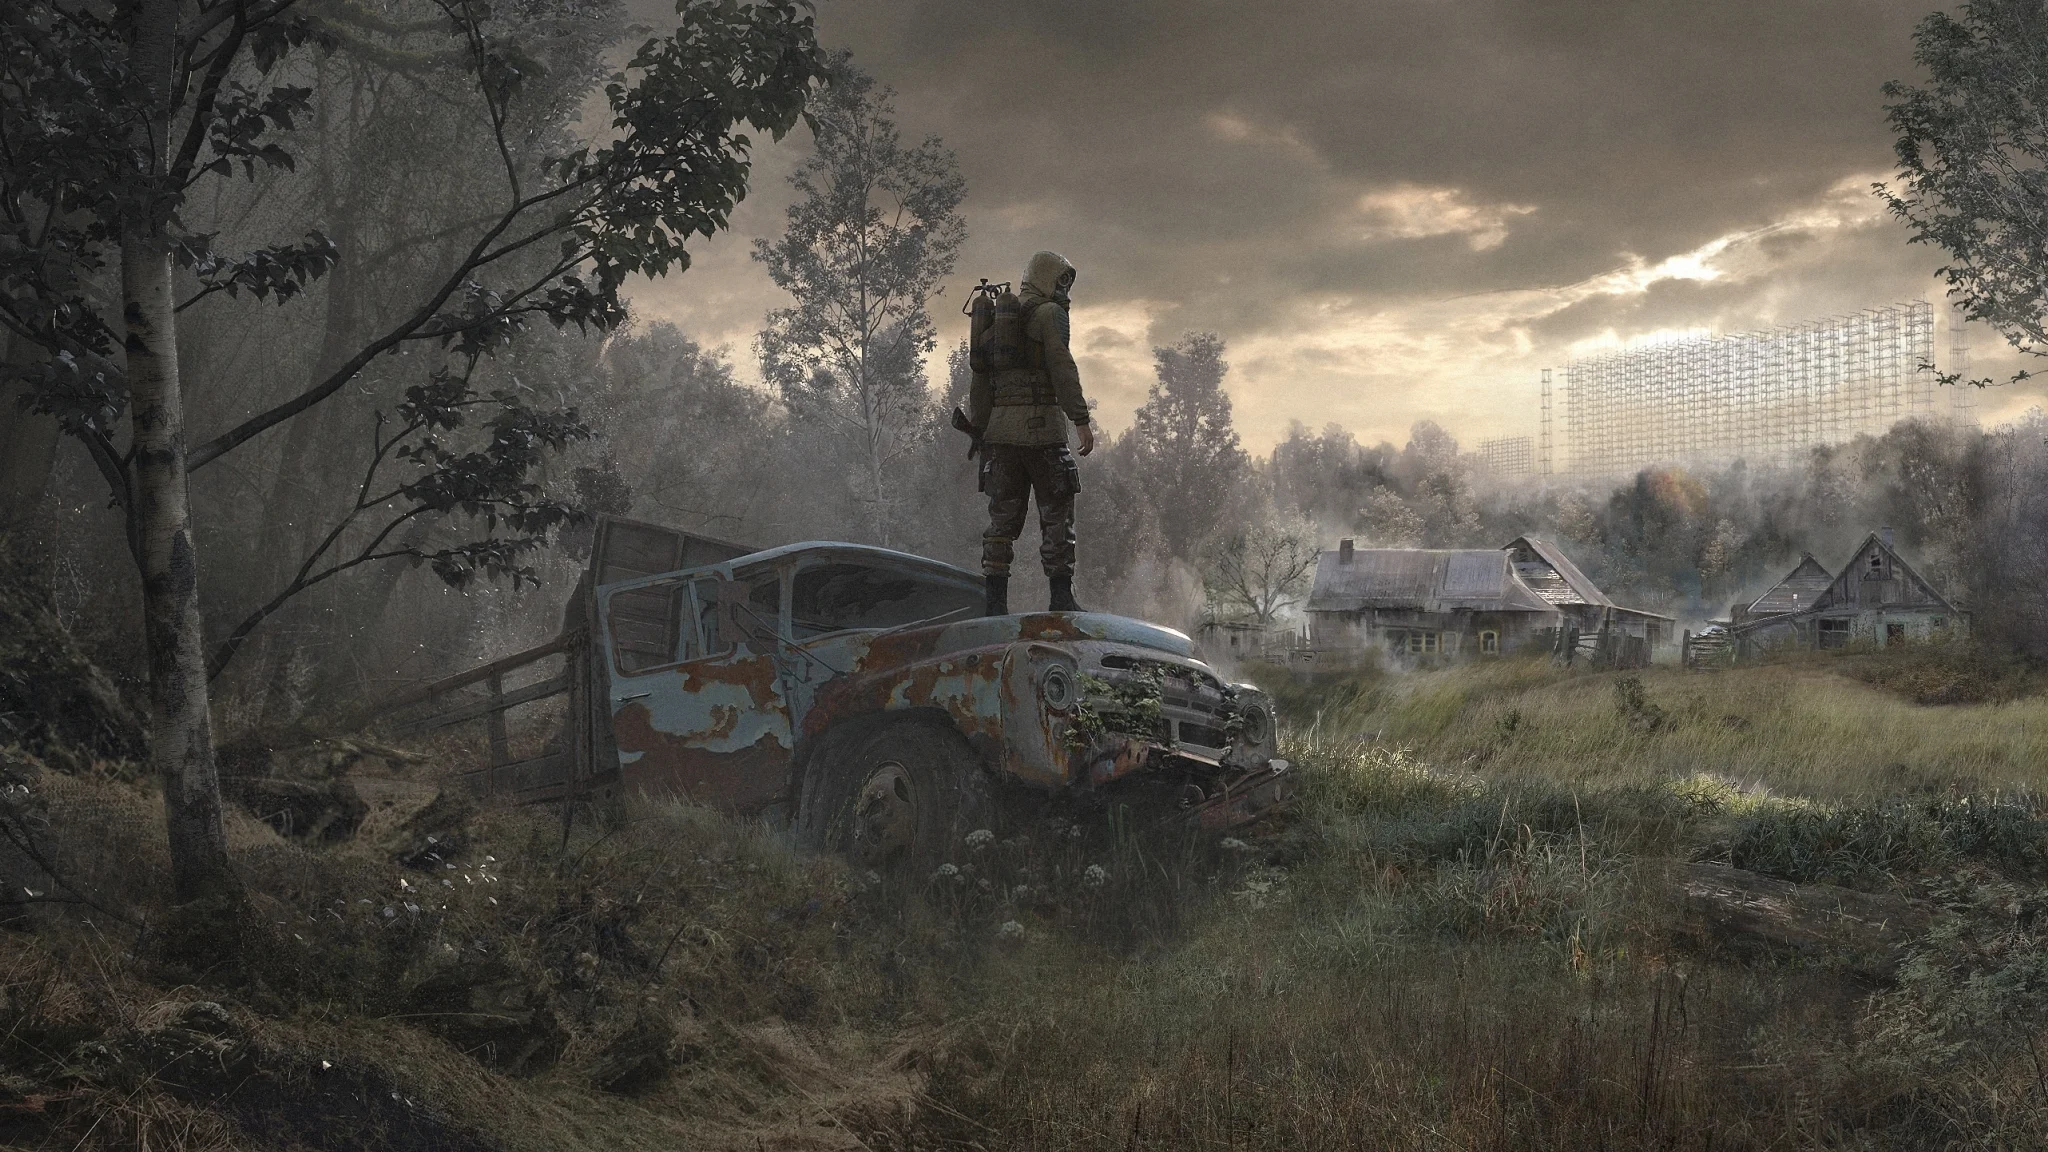 Players have started looking into the leaked build of S.T.A.L.K.E.R. 2